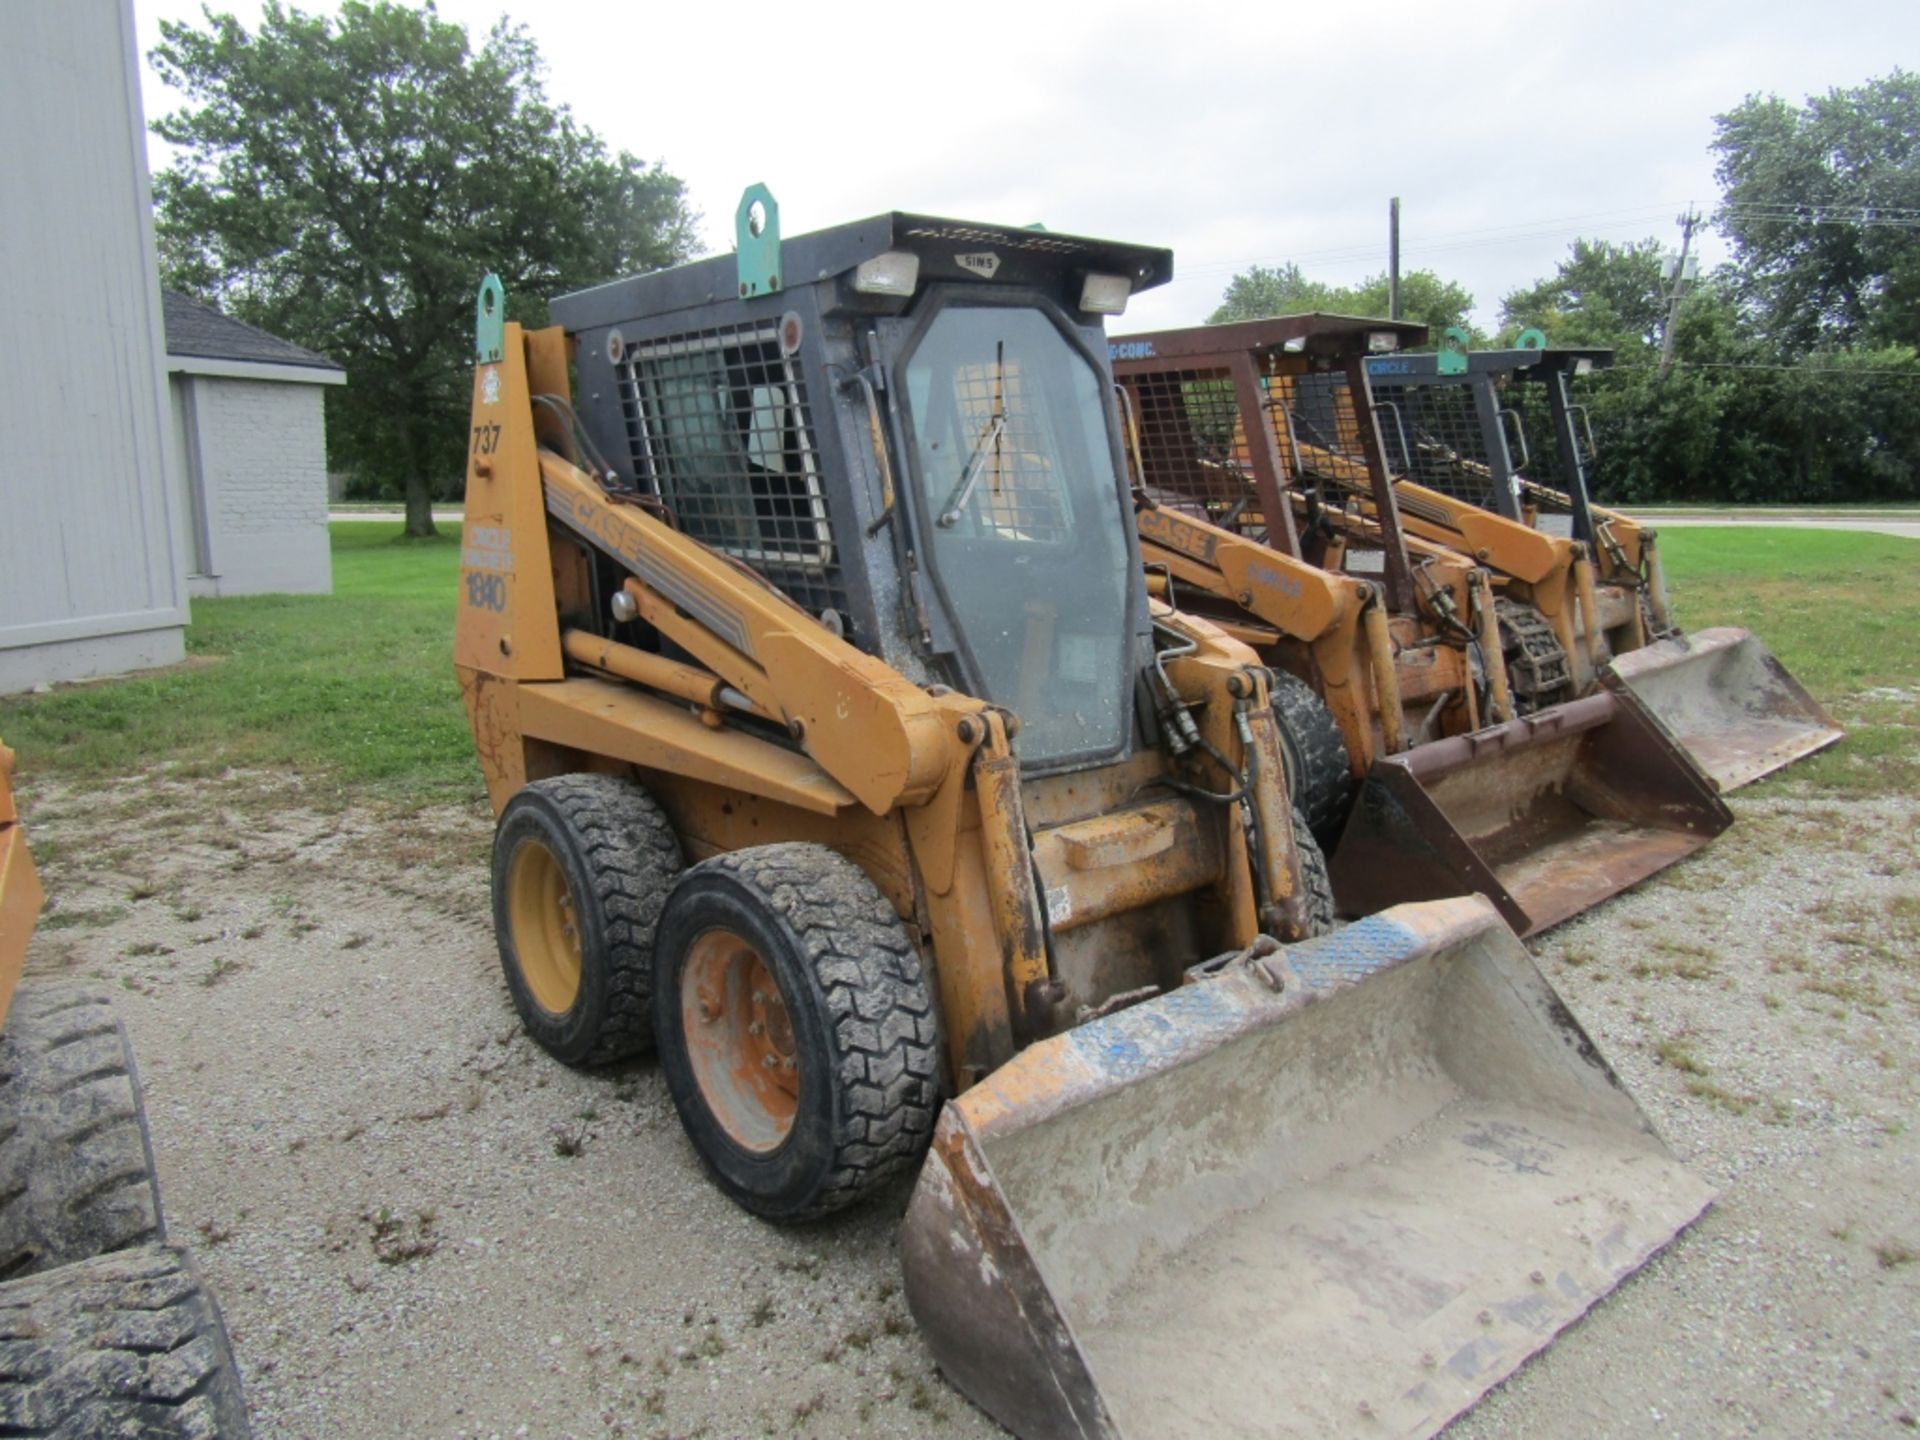 1999 Case 1840 Uni-loader with Bucket, 3517 Hours, ID #JAF0285737, - Image 2 of 12